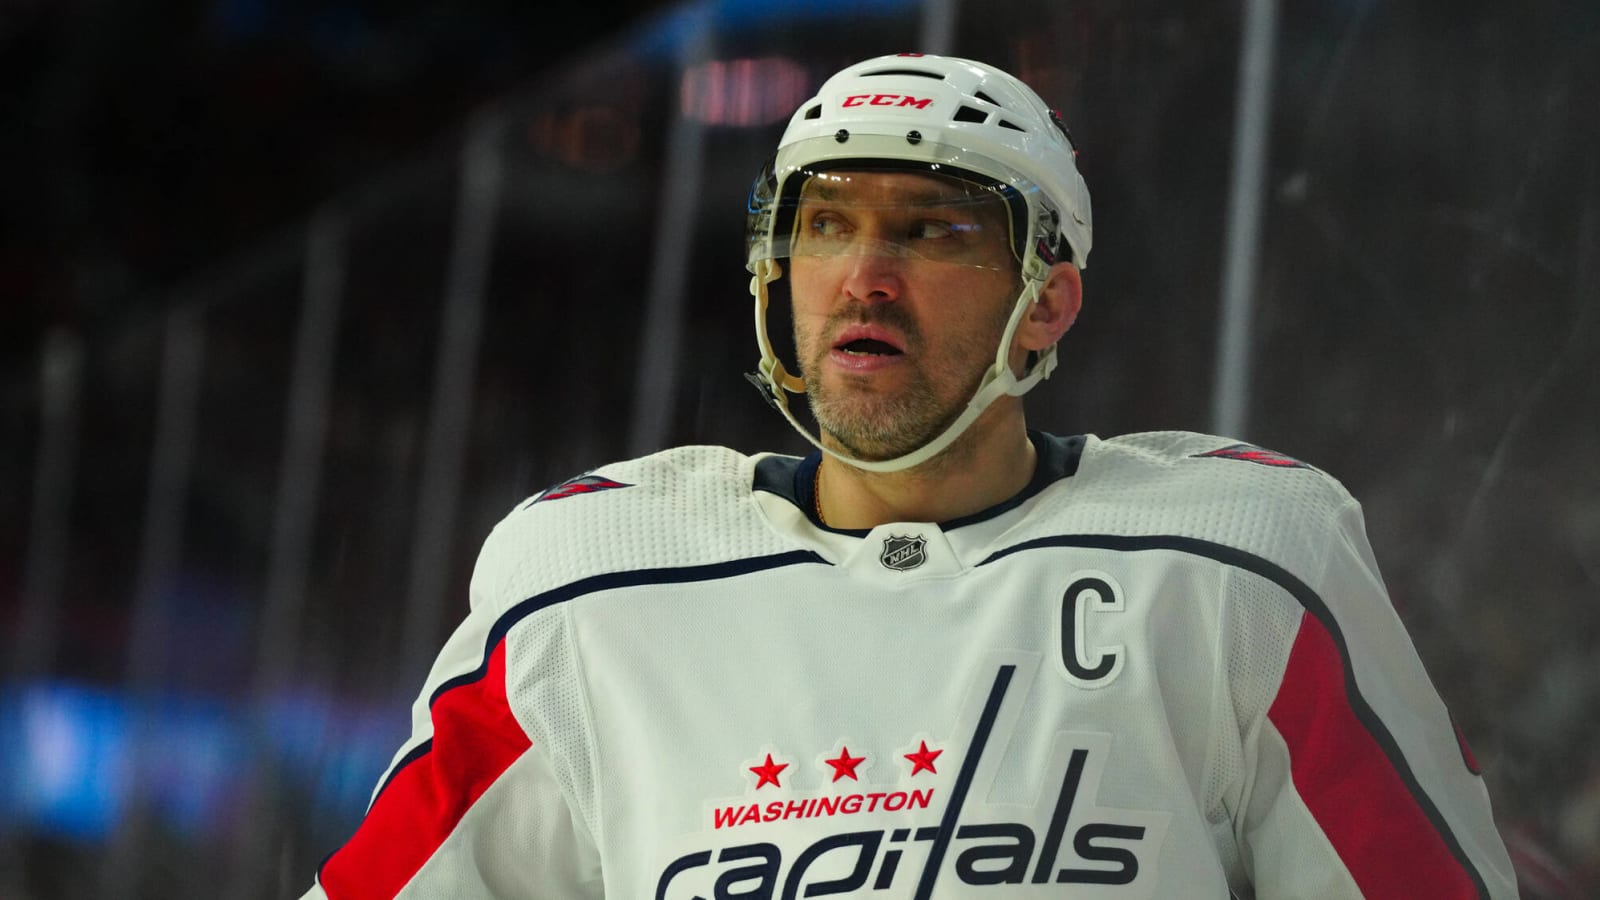 Top-5: No player in history has more 30-goal seasons than Alex Ovechkin